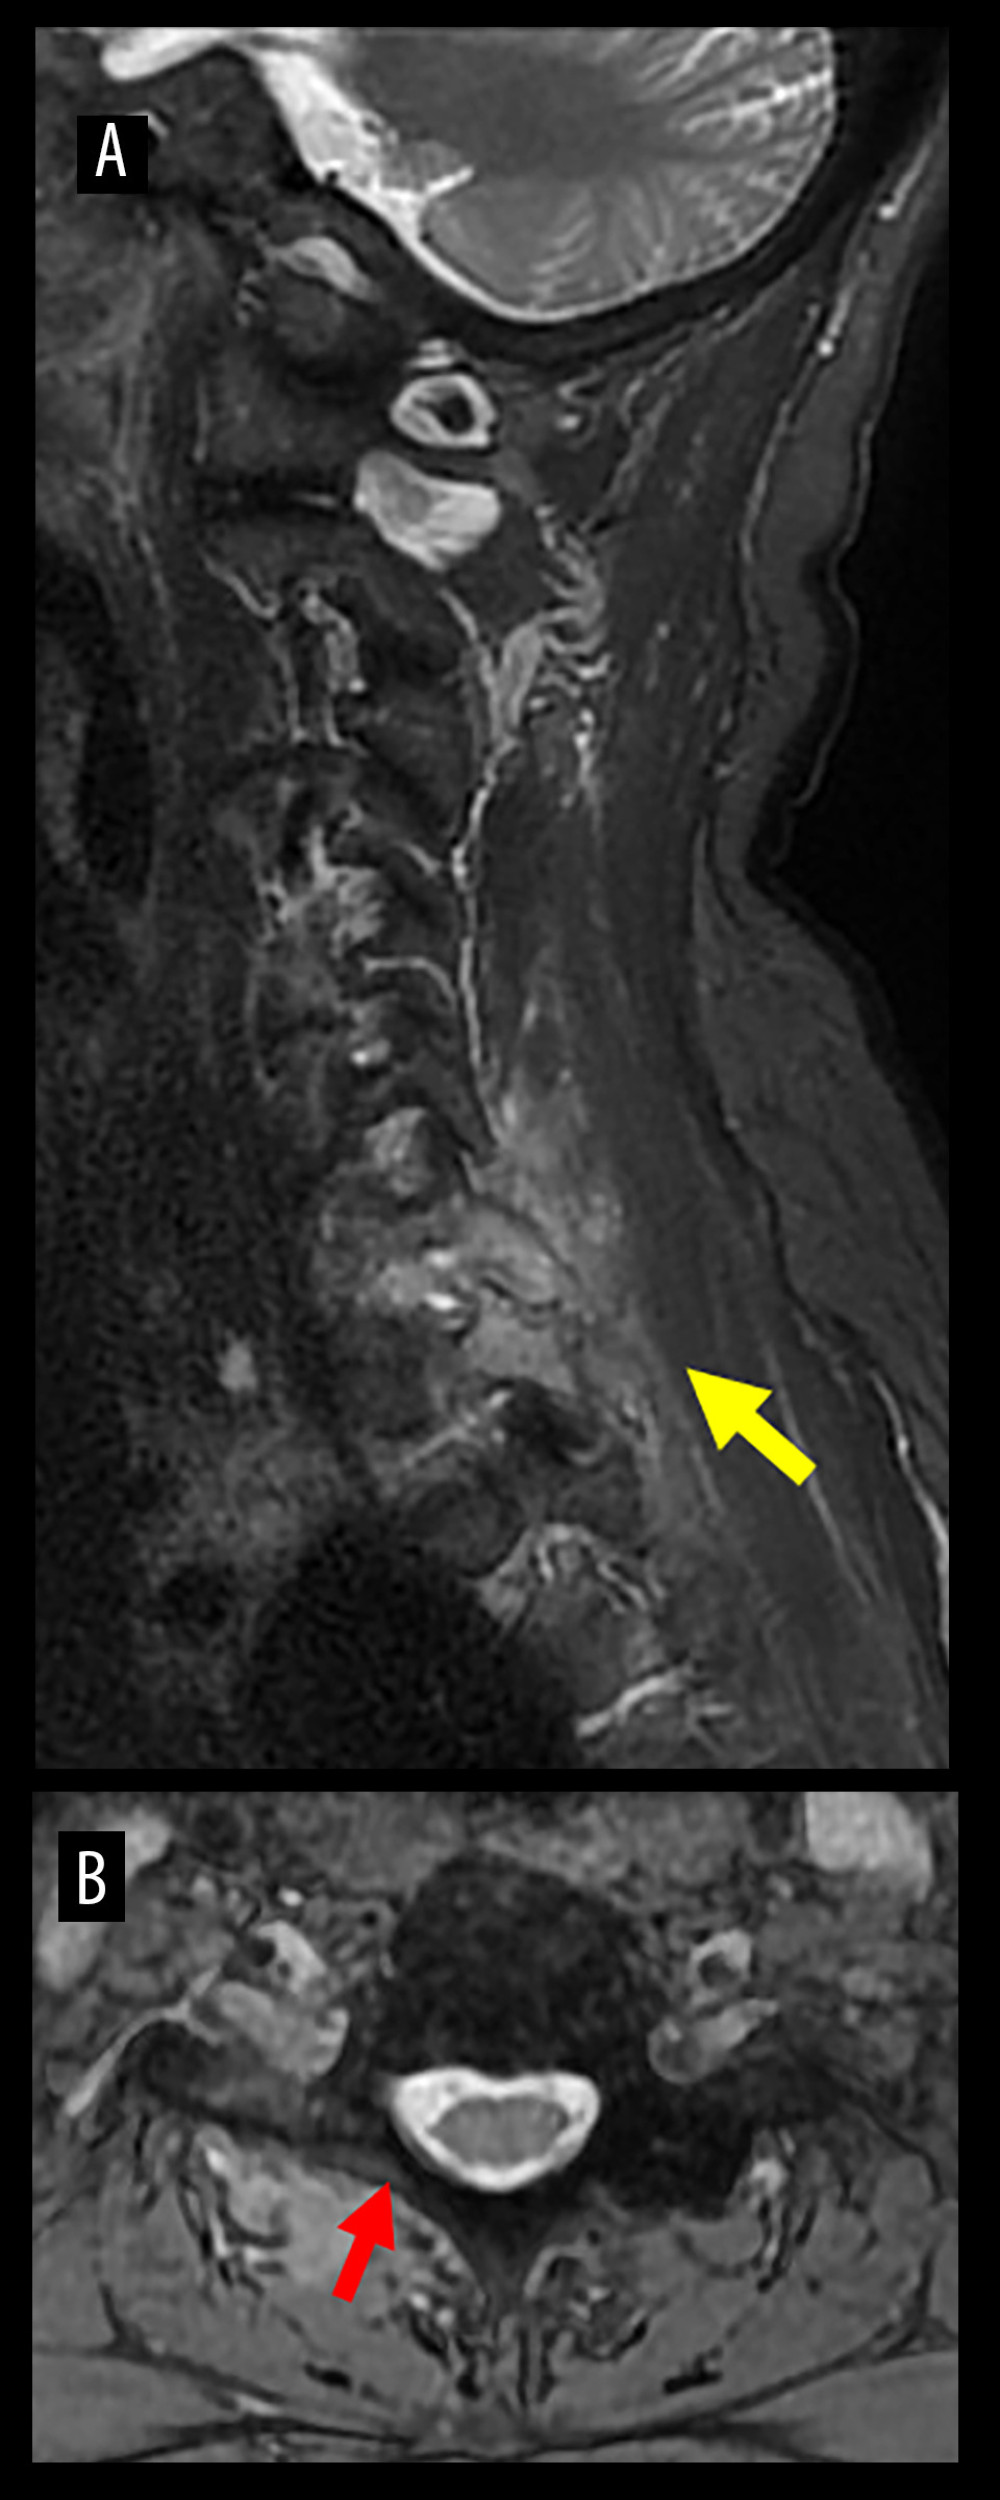 MRI of the cervical spine on day 30. Sagittal (A) and axial (B) STIR images. Continuation of high signal change in the right facet joint of C7/Th1 (yellow arrow) and disappearance of the epidural abscess (red arrow) were confirmed.